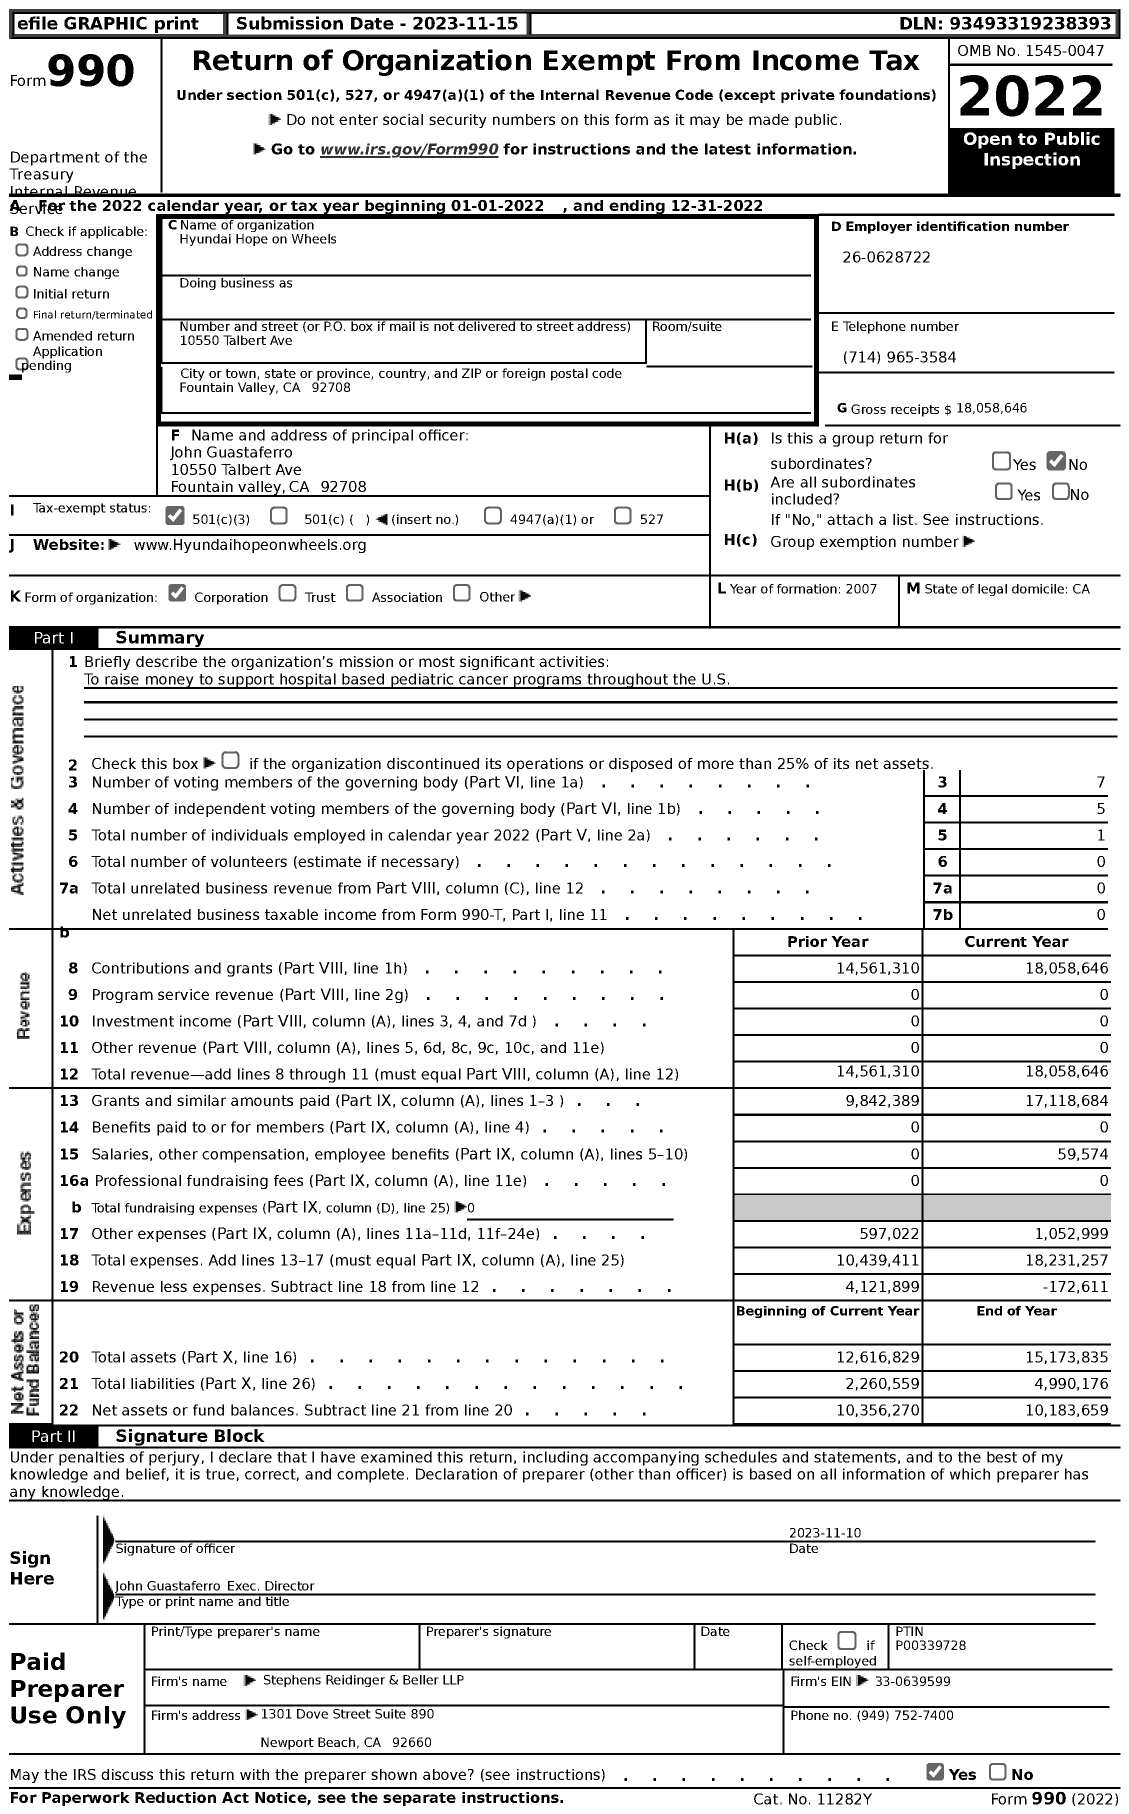 Image of first page of 2022 Form 990 for Hyundai Hope on Wheels